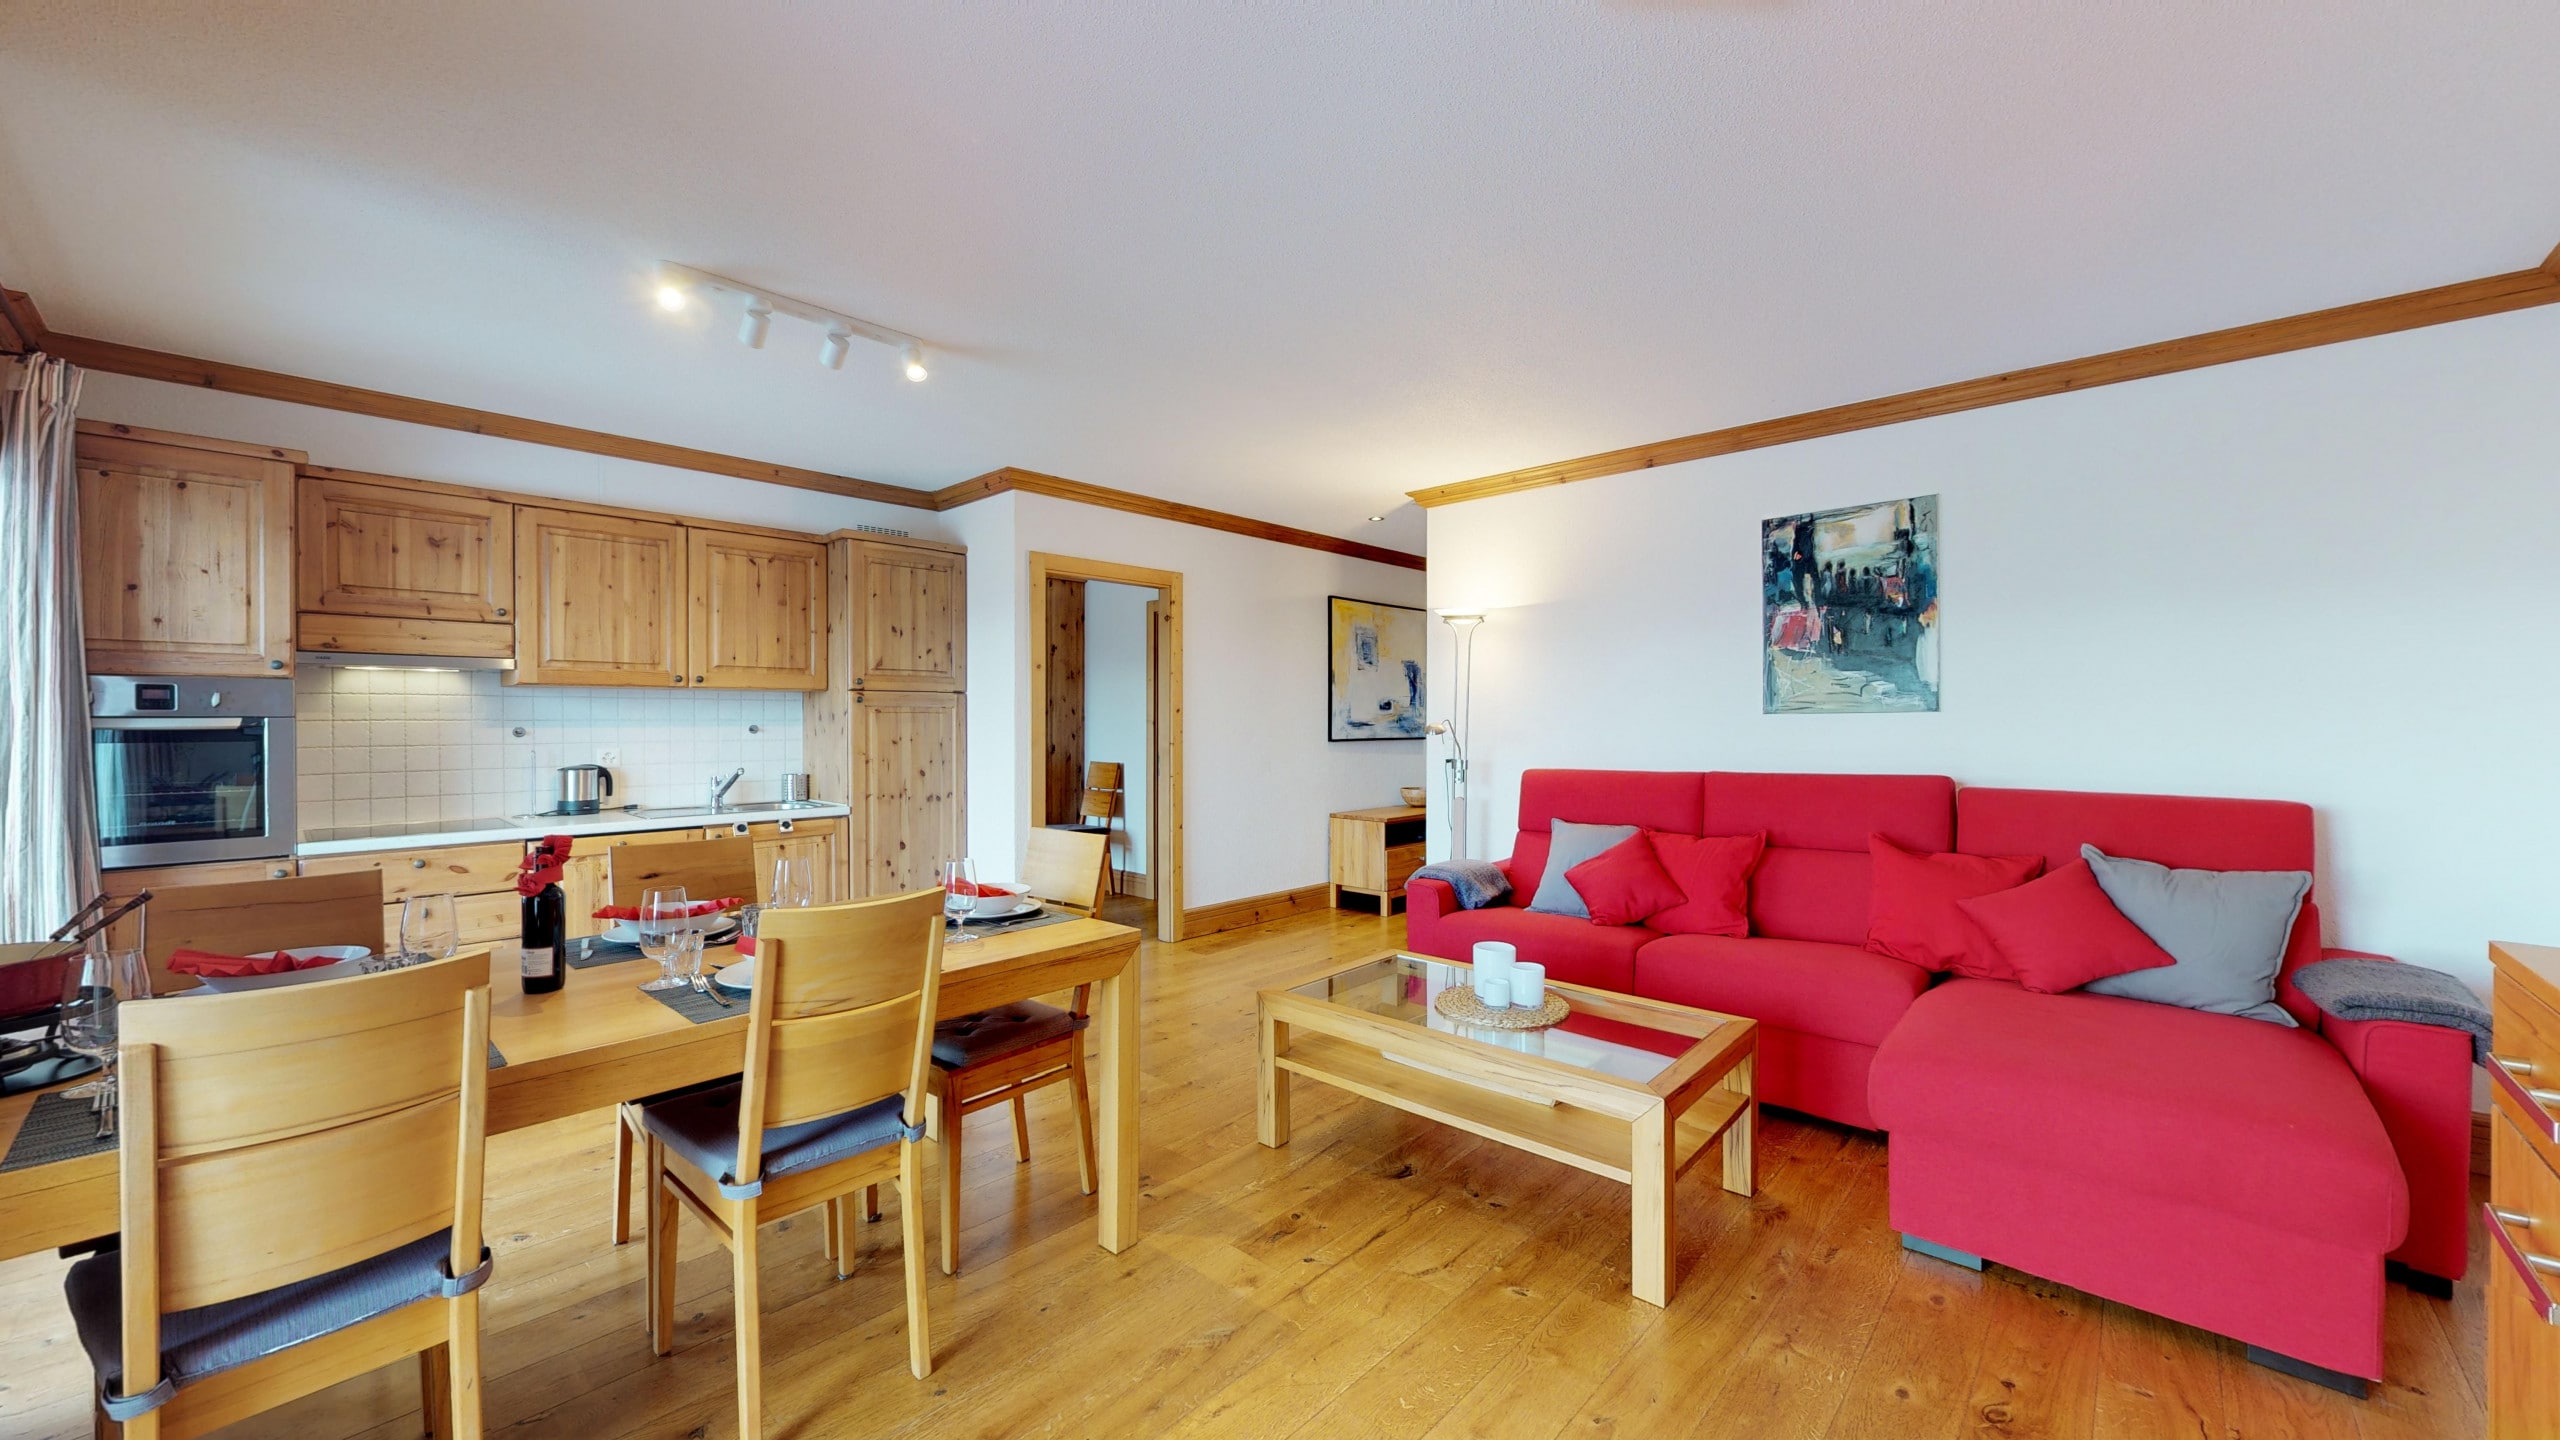 Property Image 1 - Vibrant Energetic Apartment with Mountain Ranges Views